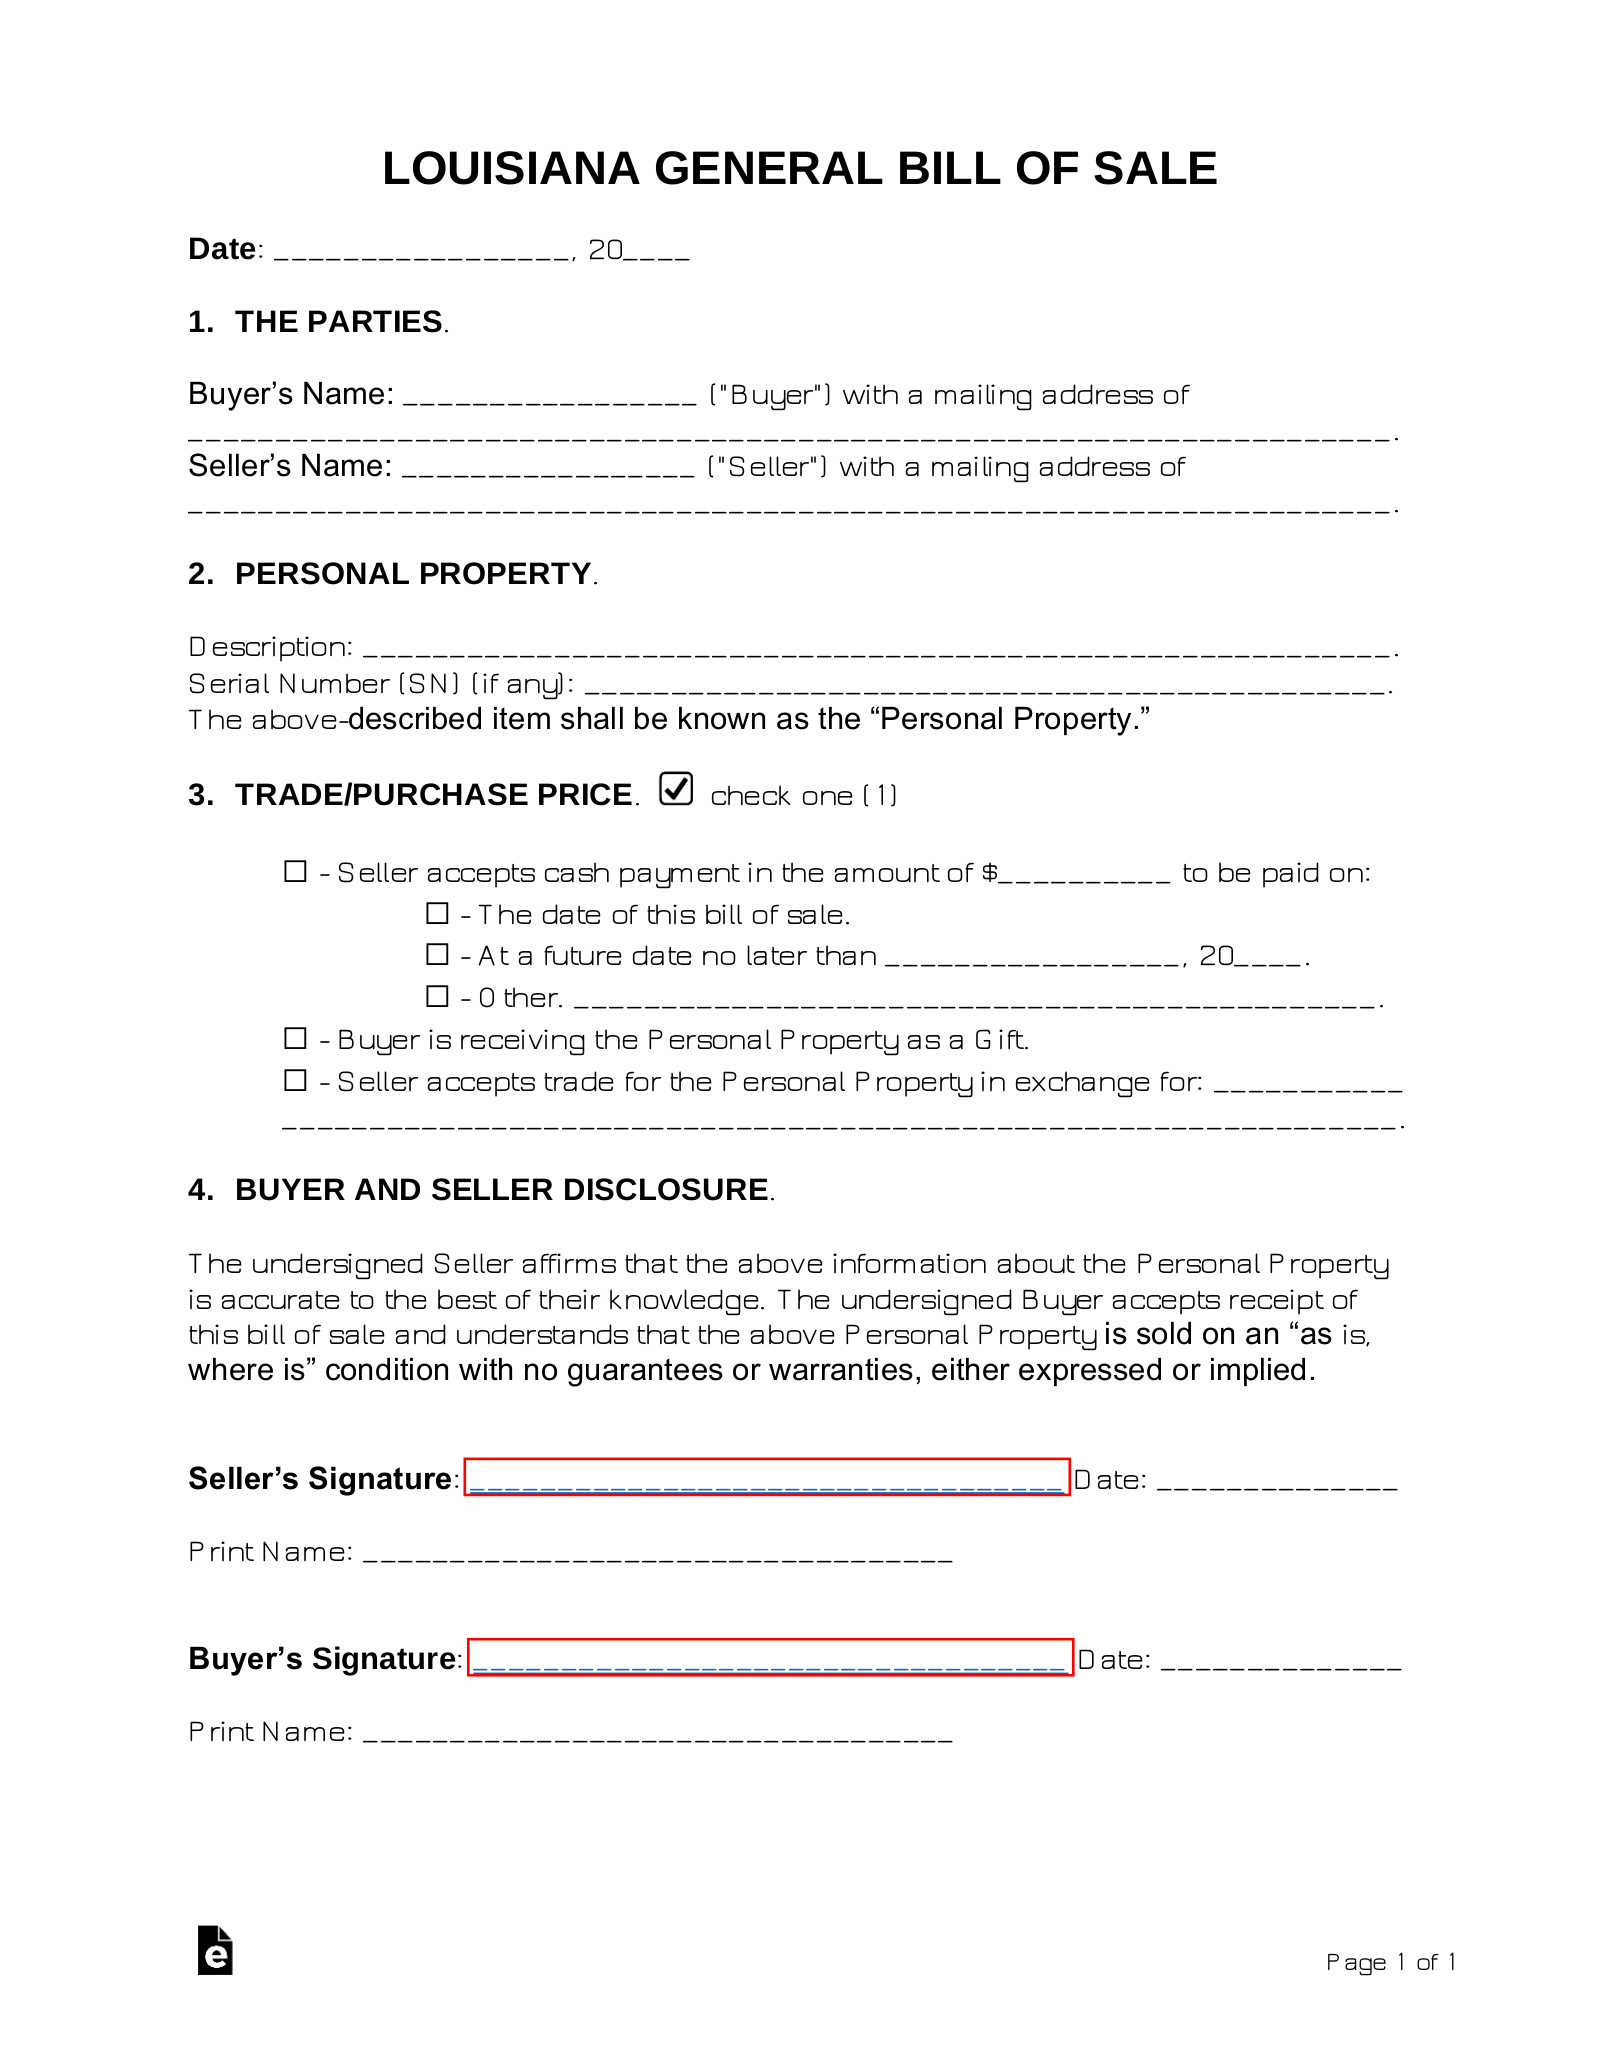 free-mobile-manufactured-home-bill-of-sale-form-pdf